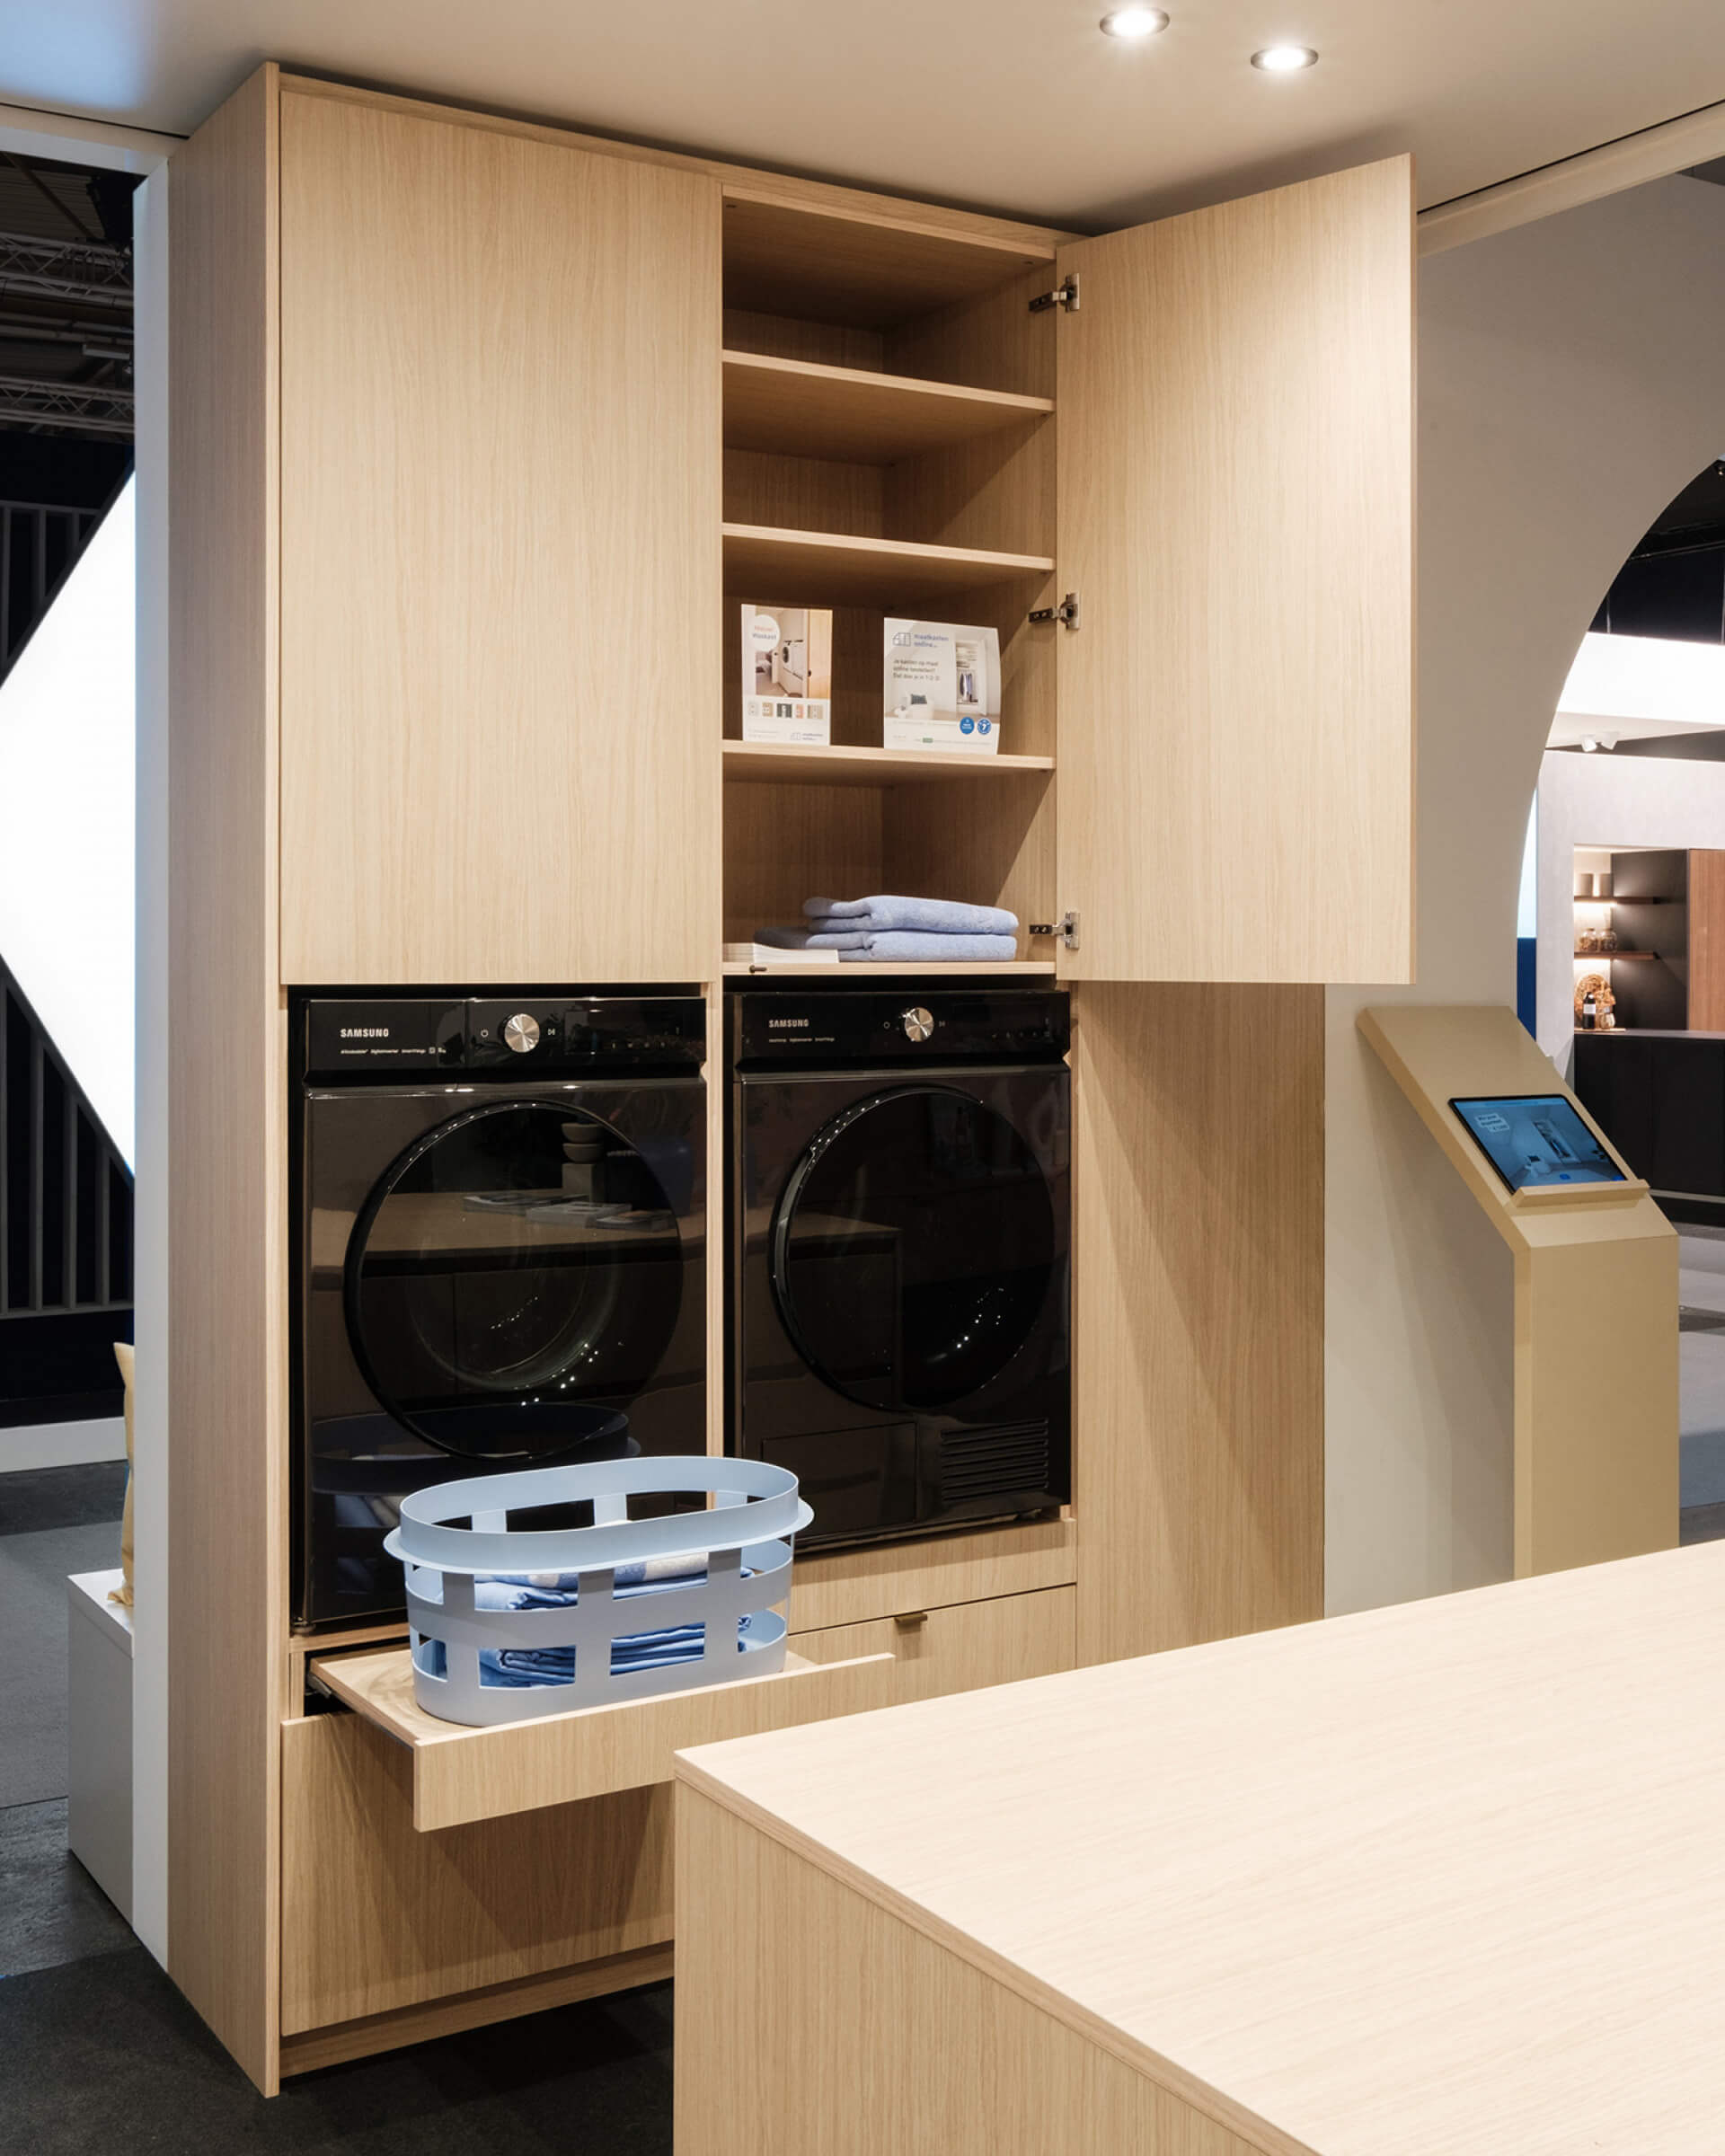 Tailor made laundry closet in oak structure by maatkasten online